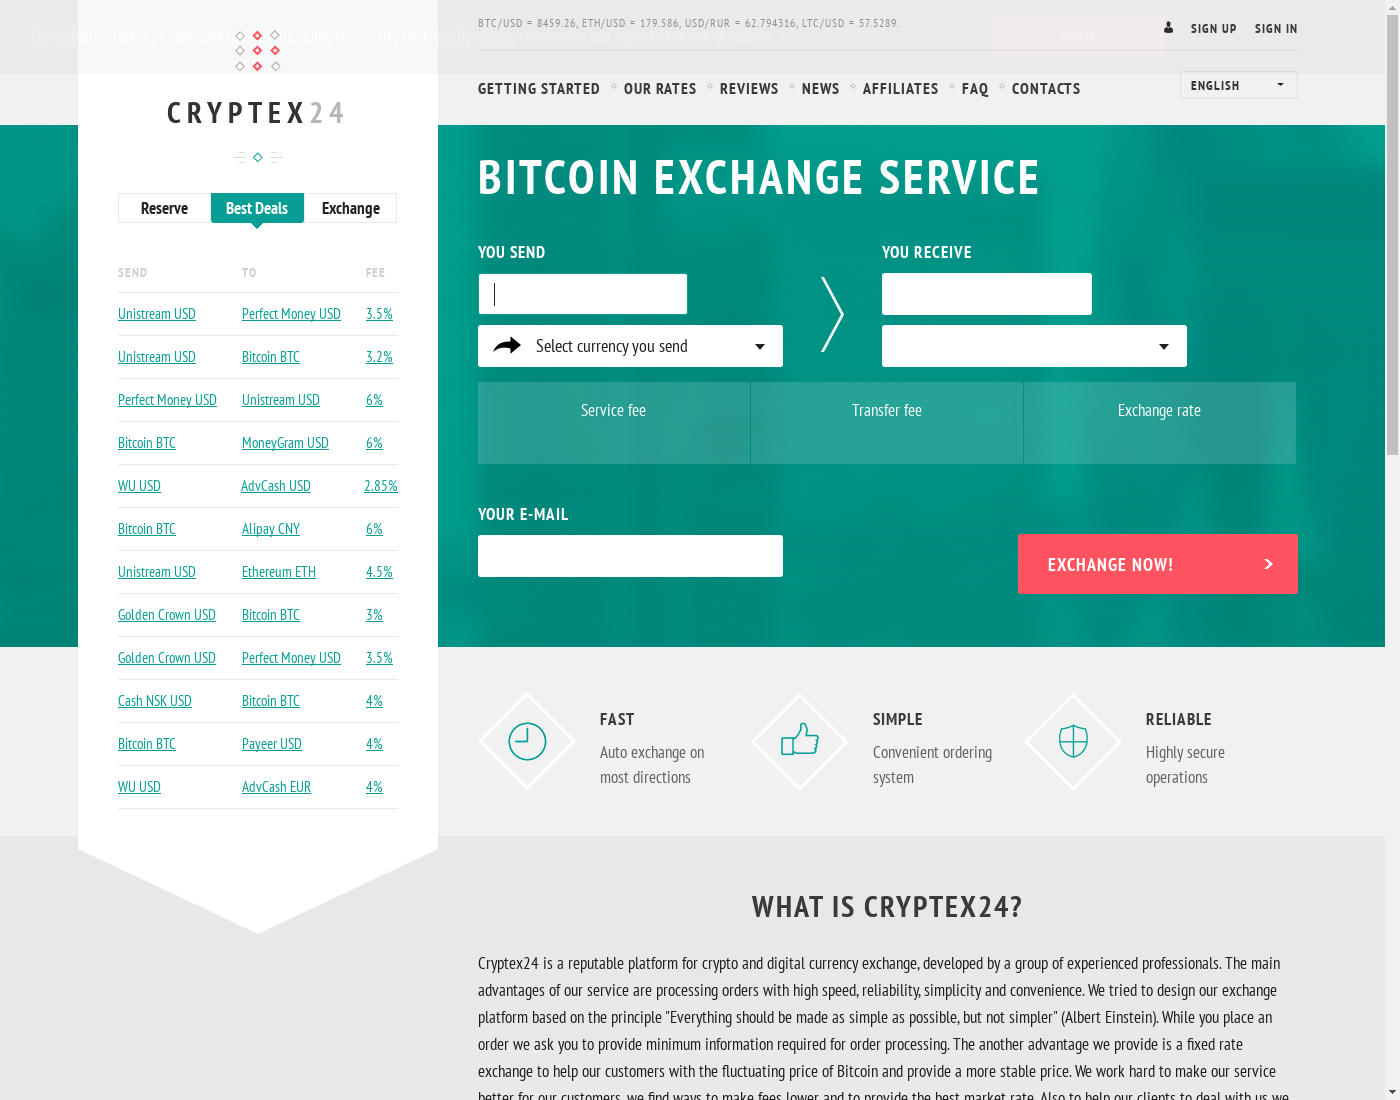 Cryptex24 user interface: the home page in English